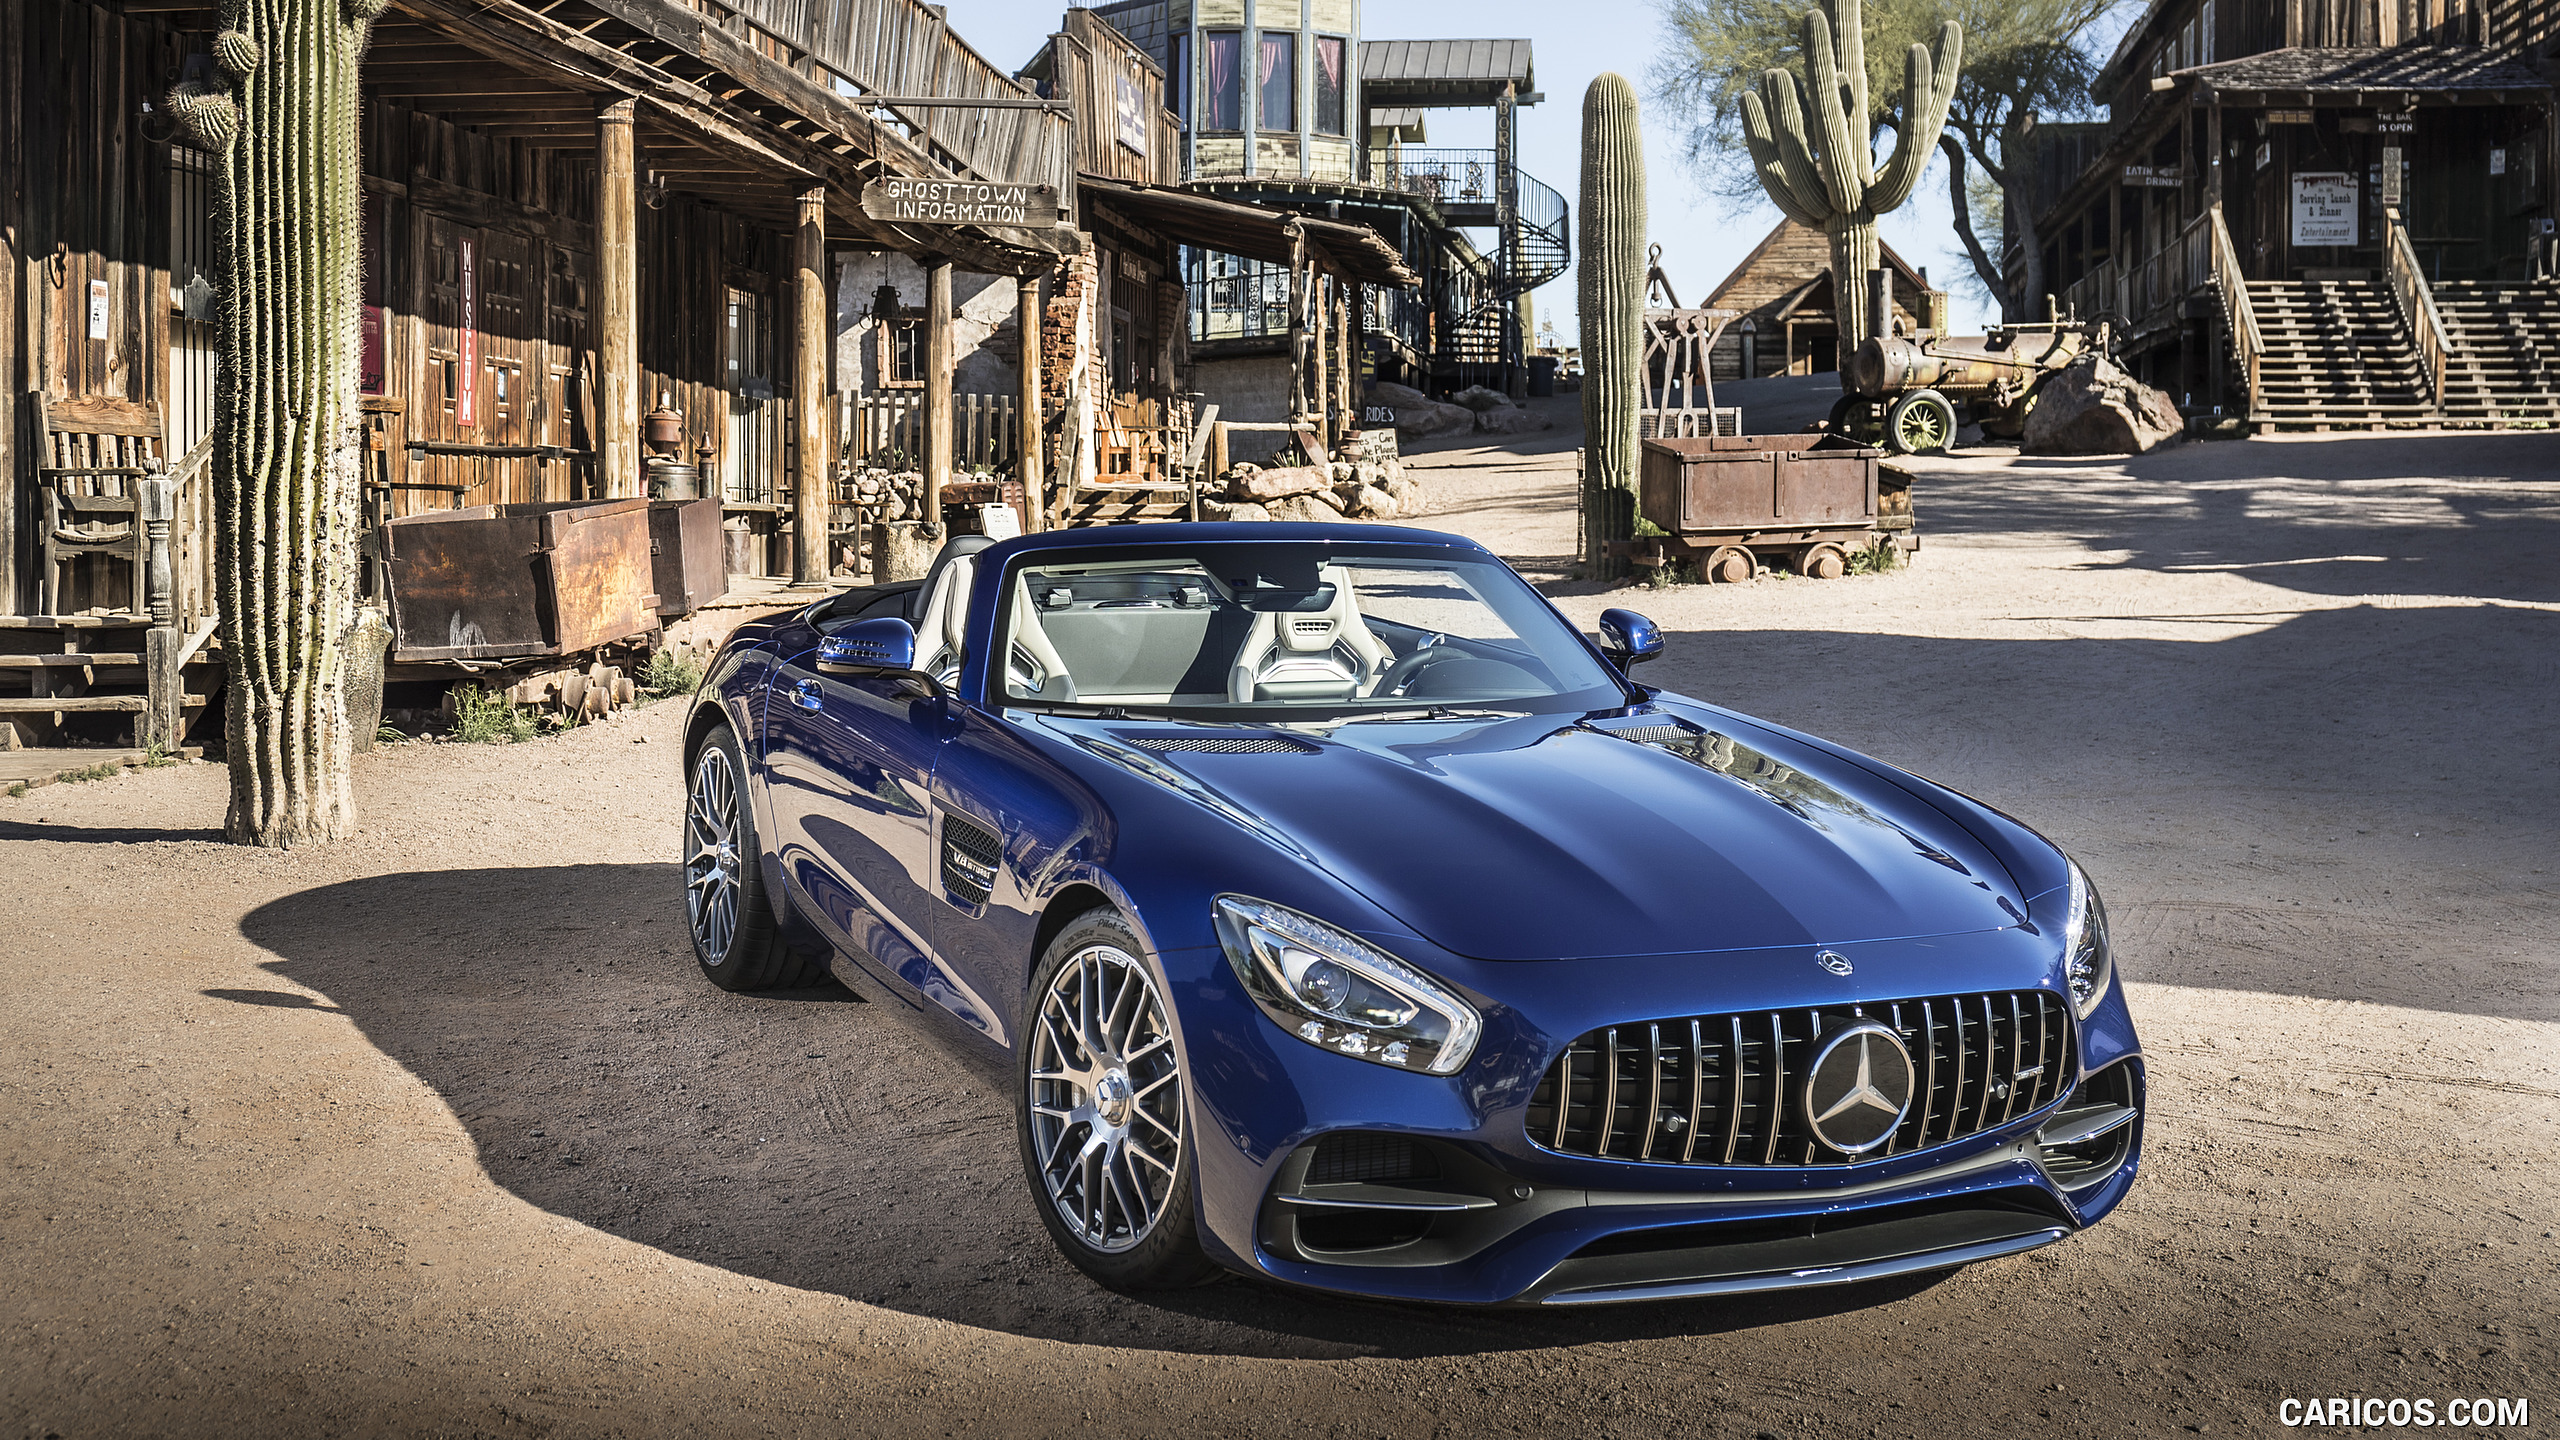 2018 Mercedes-AMG GT Roadster - Front Three-Quarter, #111 of 350